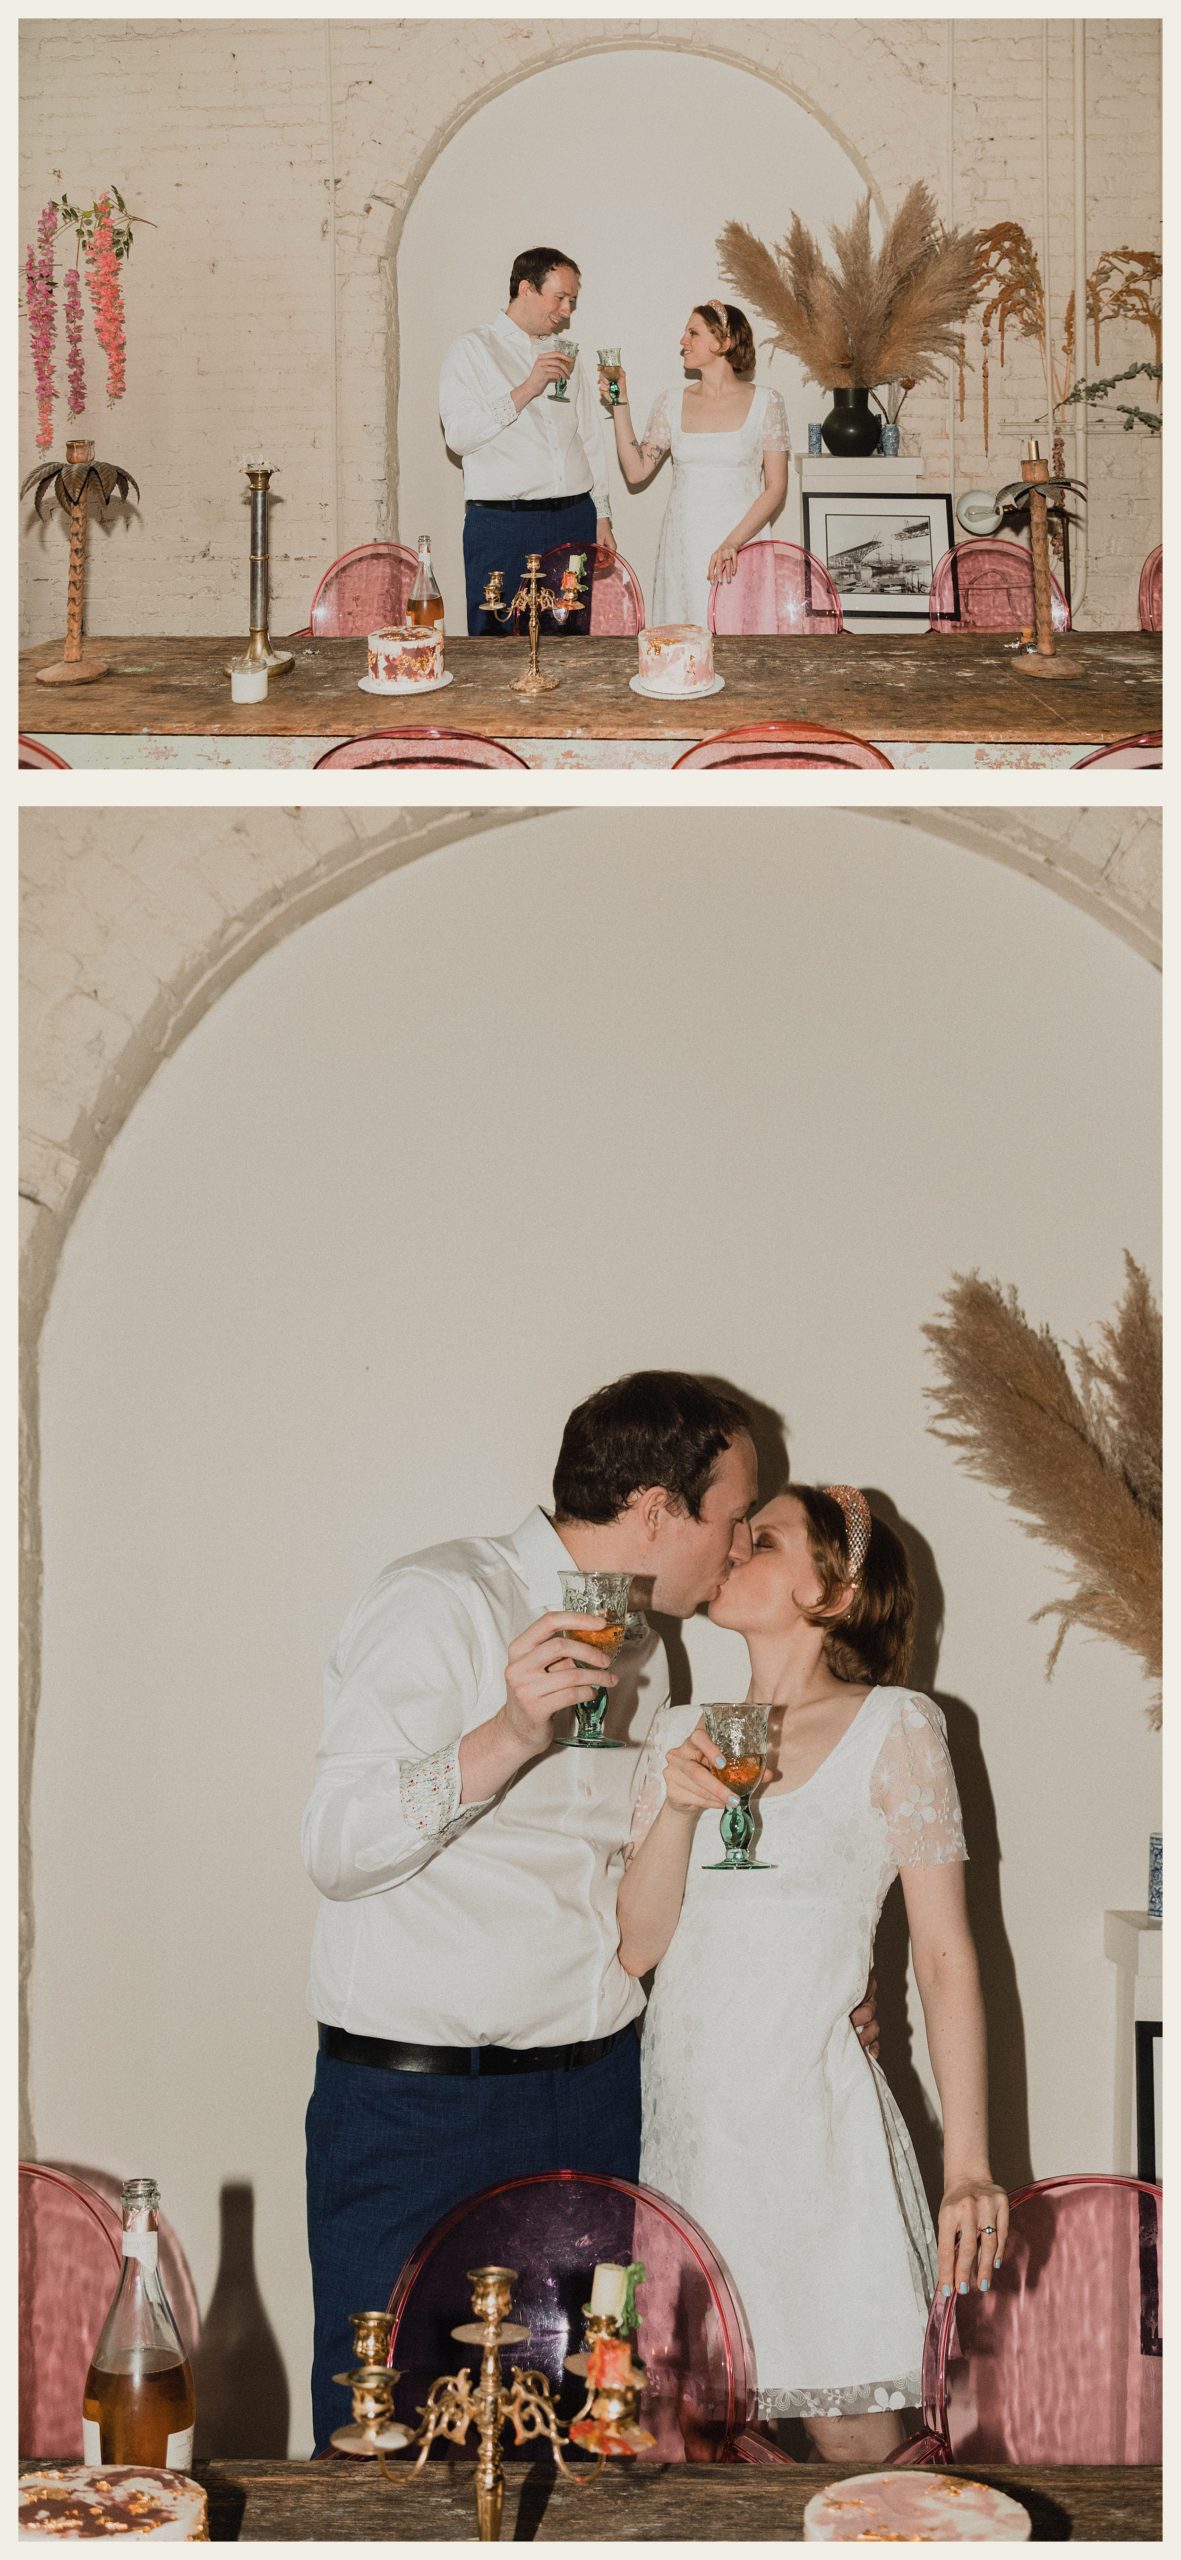 bride and groom drinking together banana stand studio

